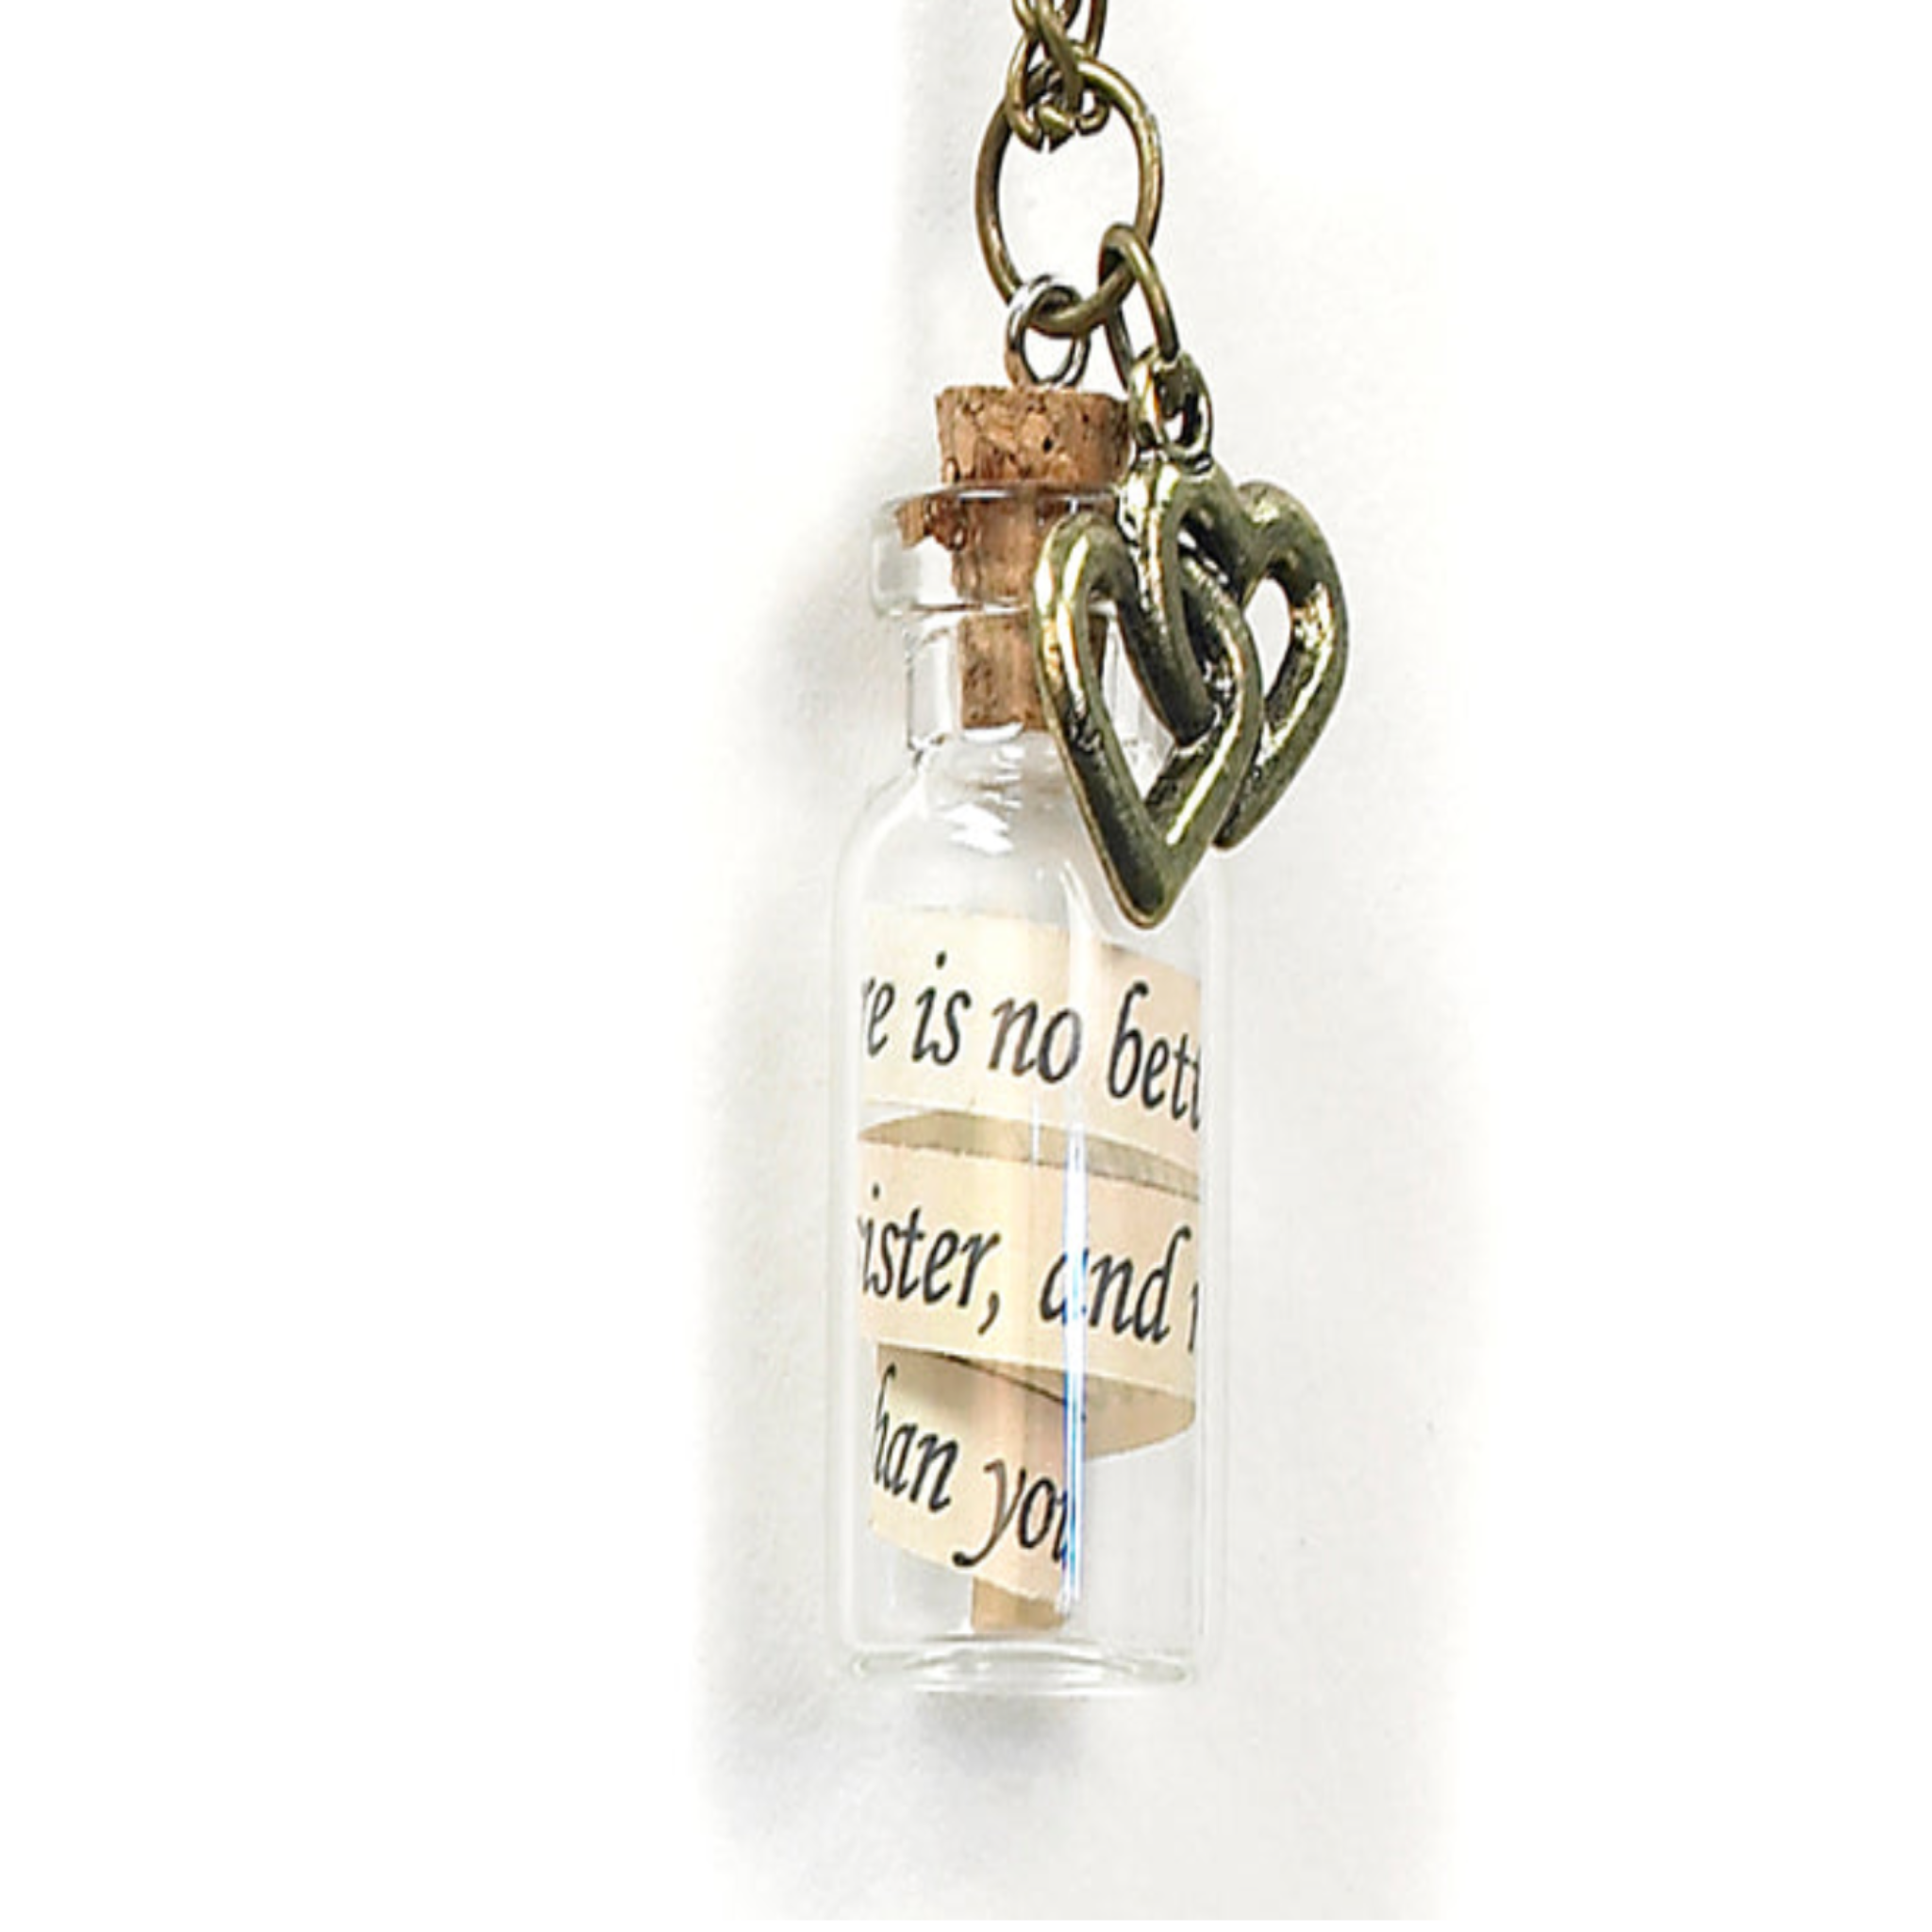 MONARCH MESSAGE IN A BOTTLE NECKLACE